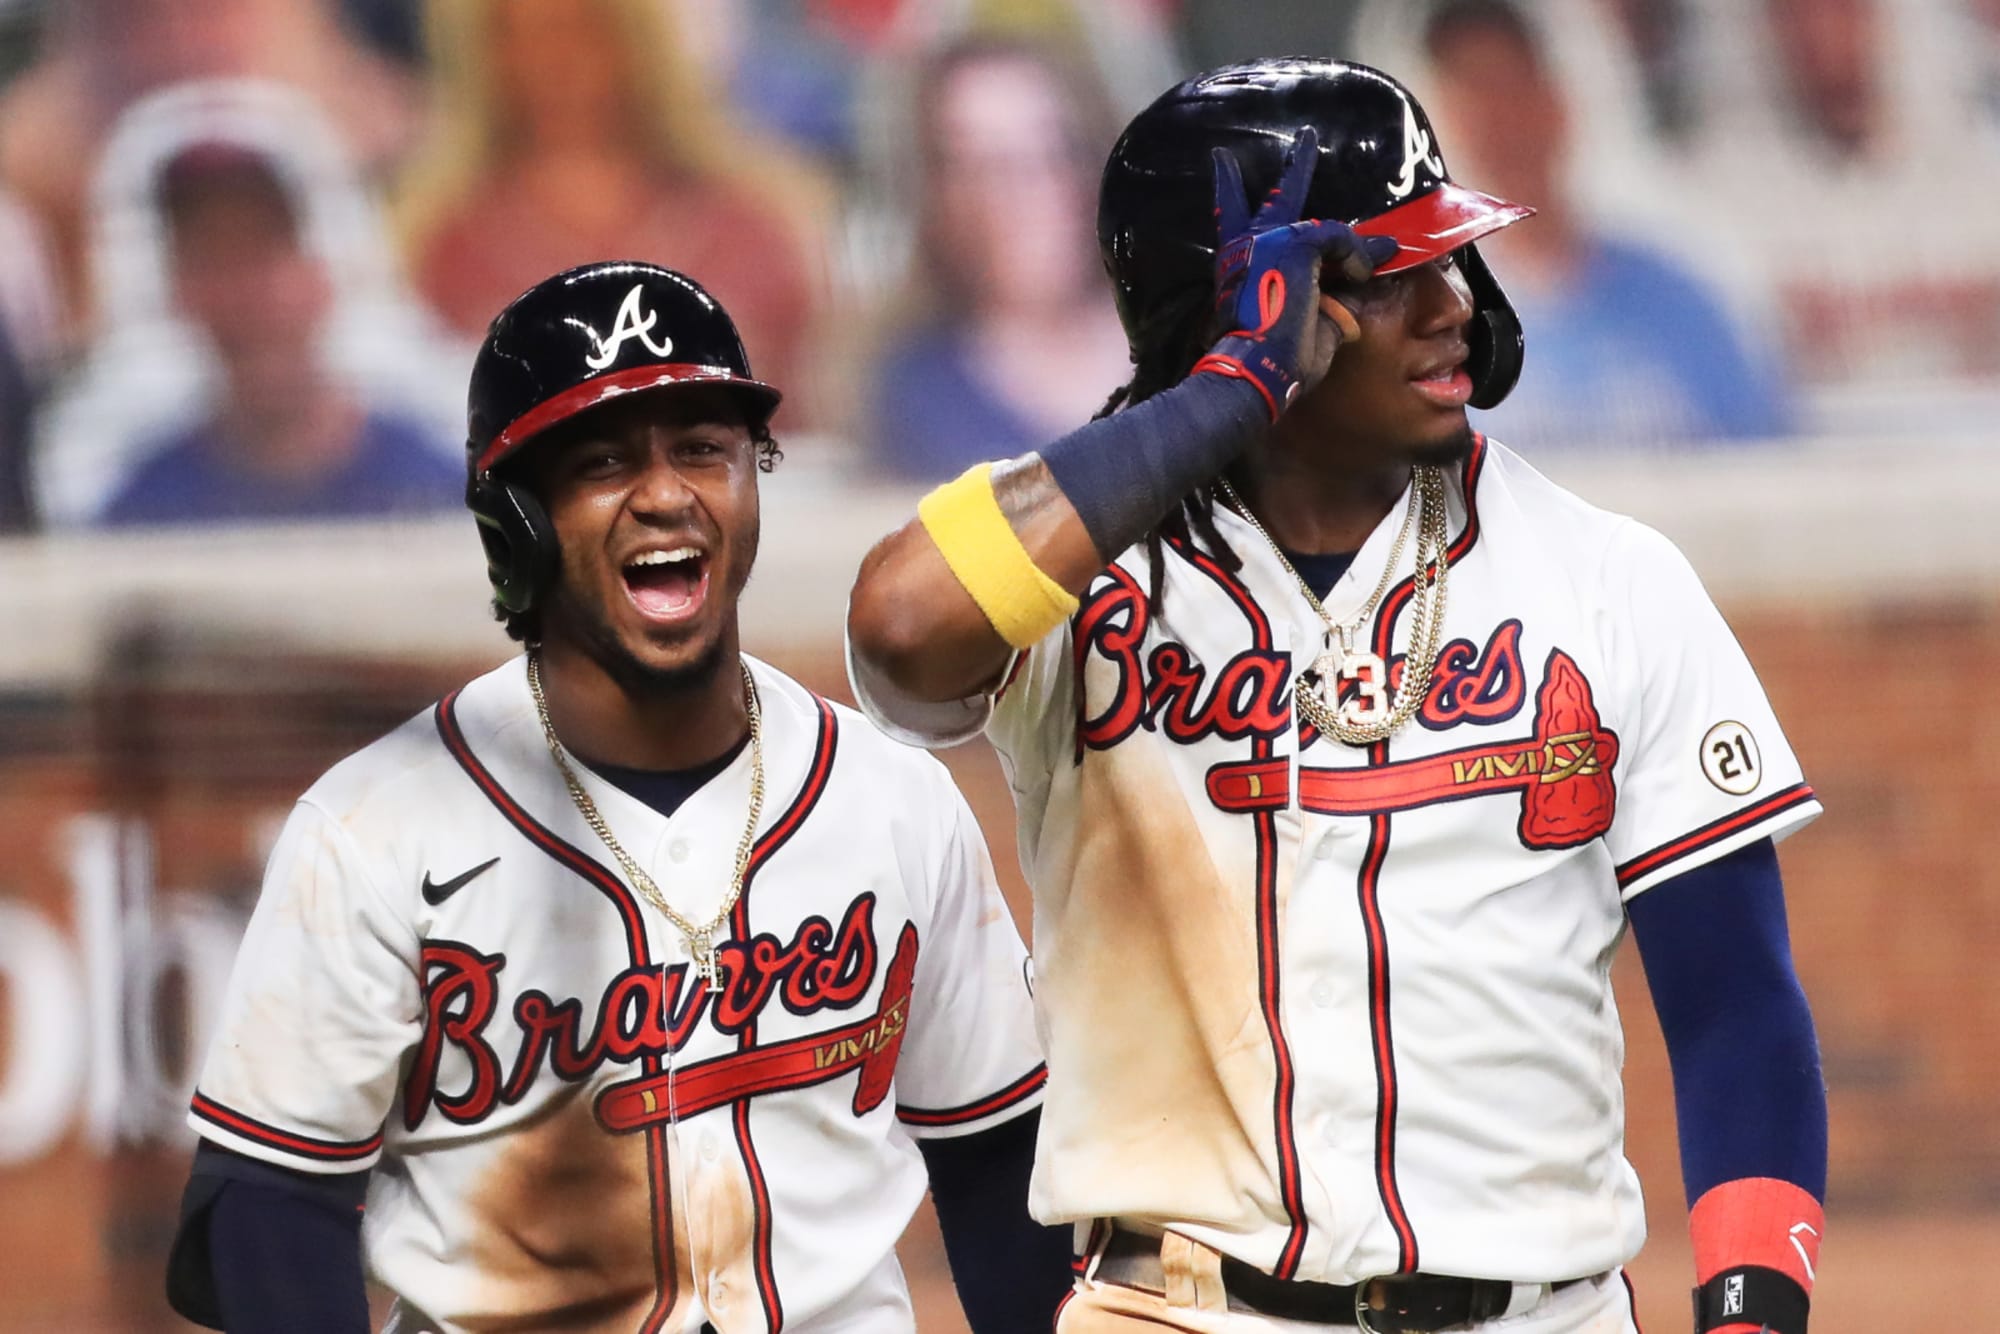 Atlanta Braves Have 4 Top Players Under the Age of 25